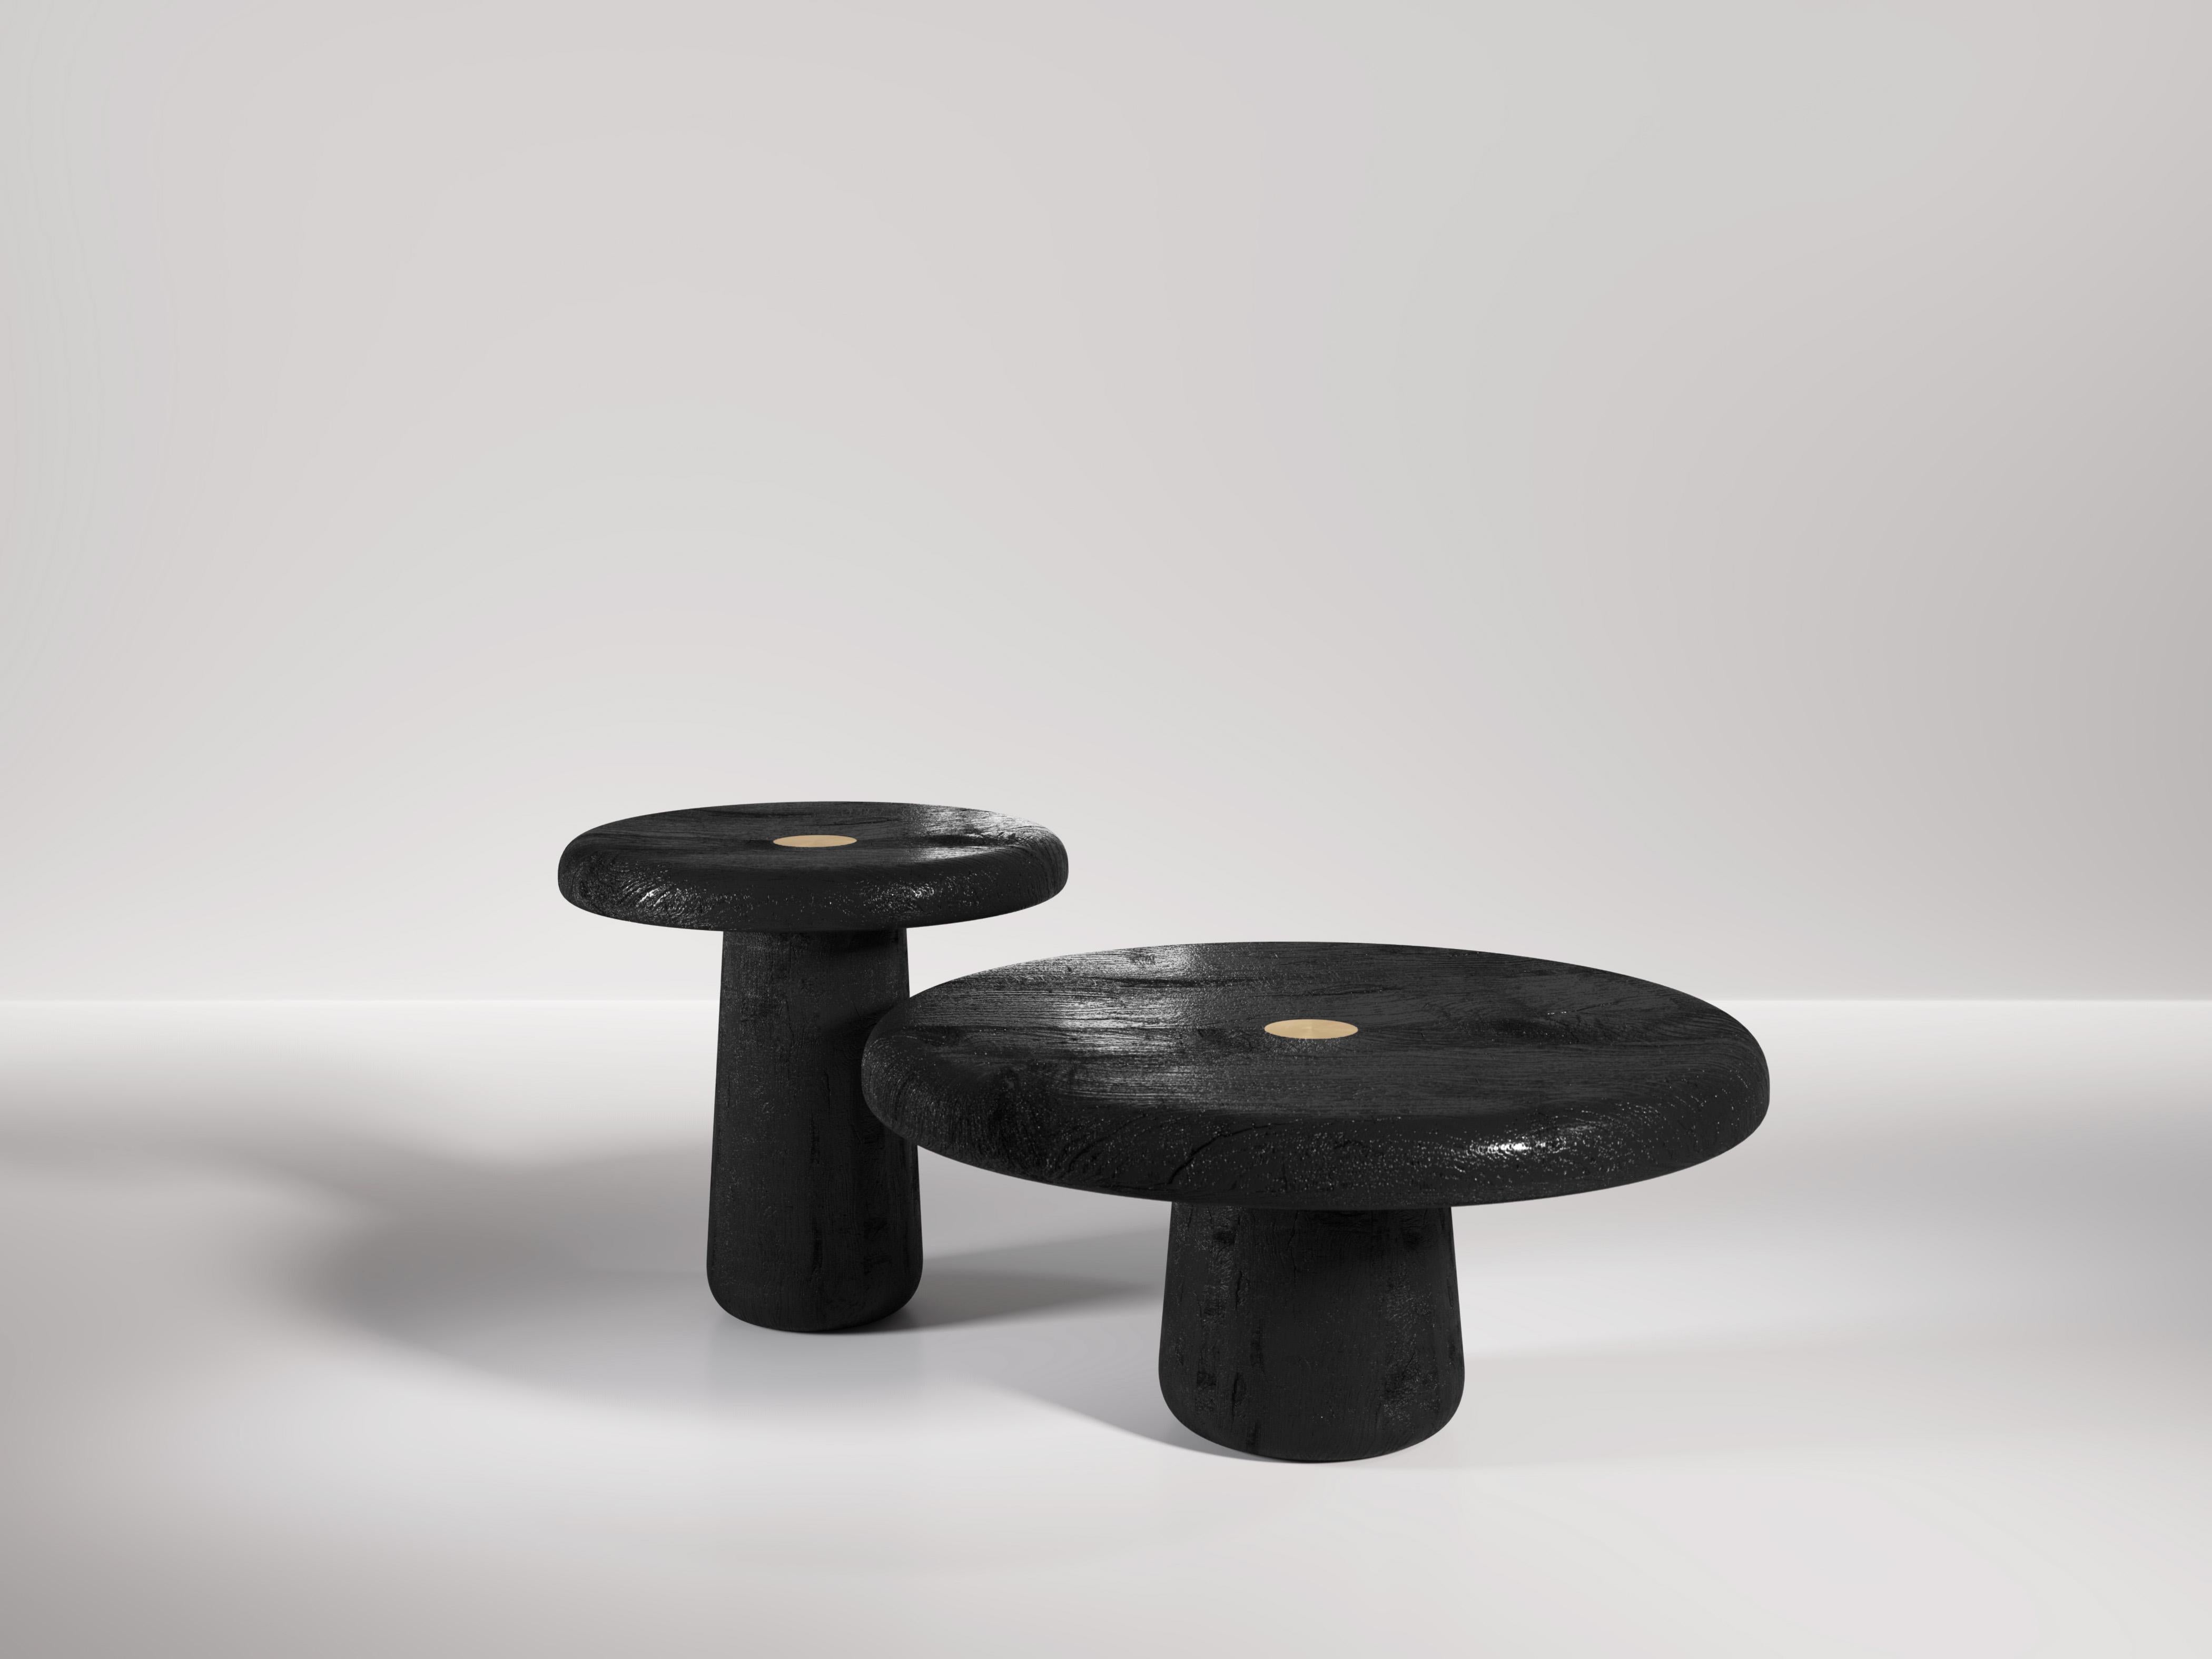 The Spore coffee tables are a set of coffee tables made unique by a series of intricate details. The base of each table is perfectly milled from one piece of wood with soft curves to add to the organic aesthetic of the piece. Each table has a